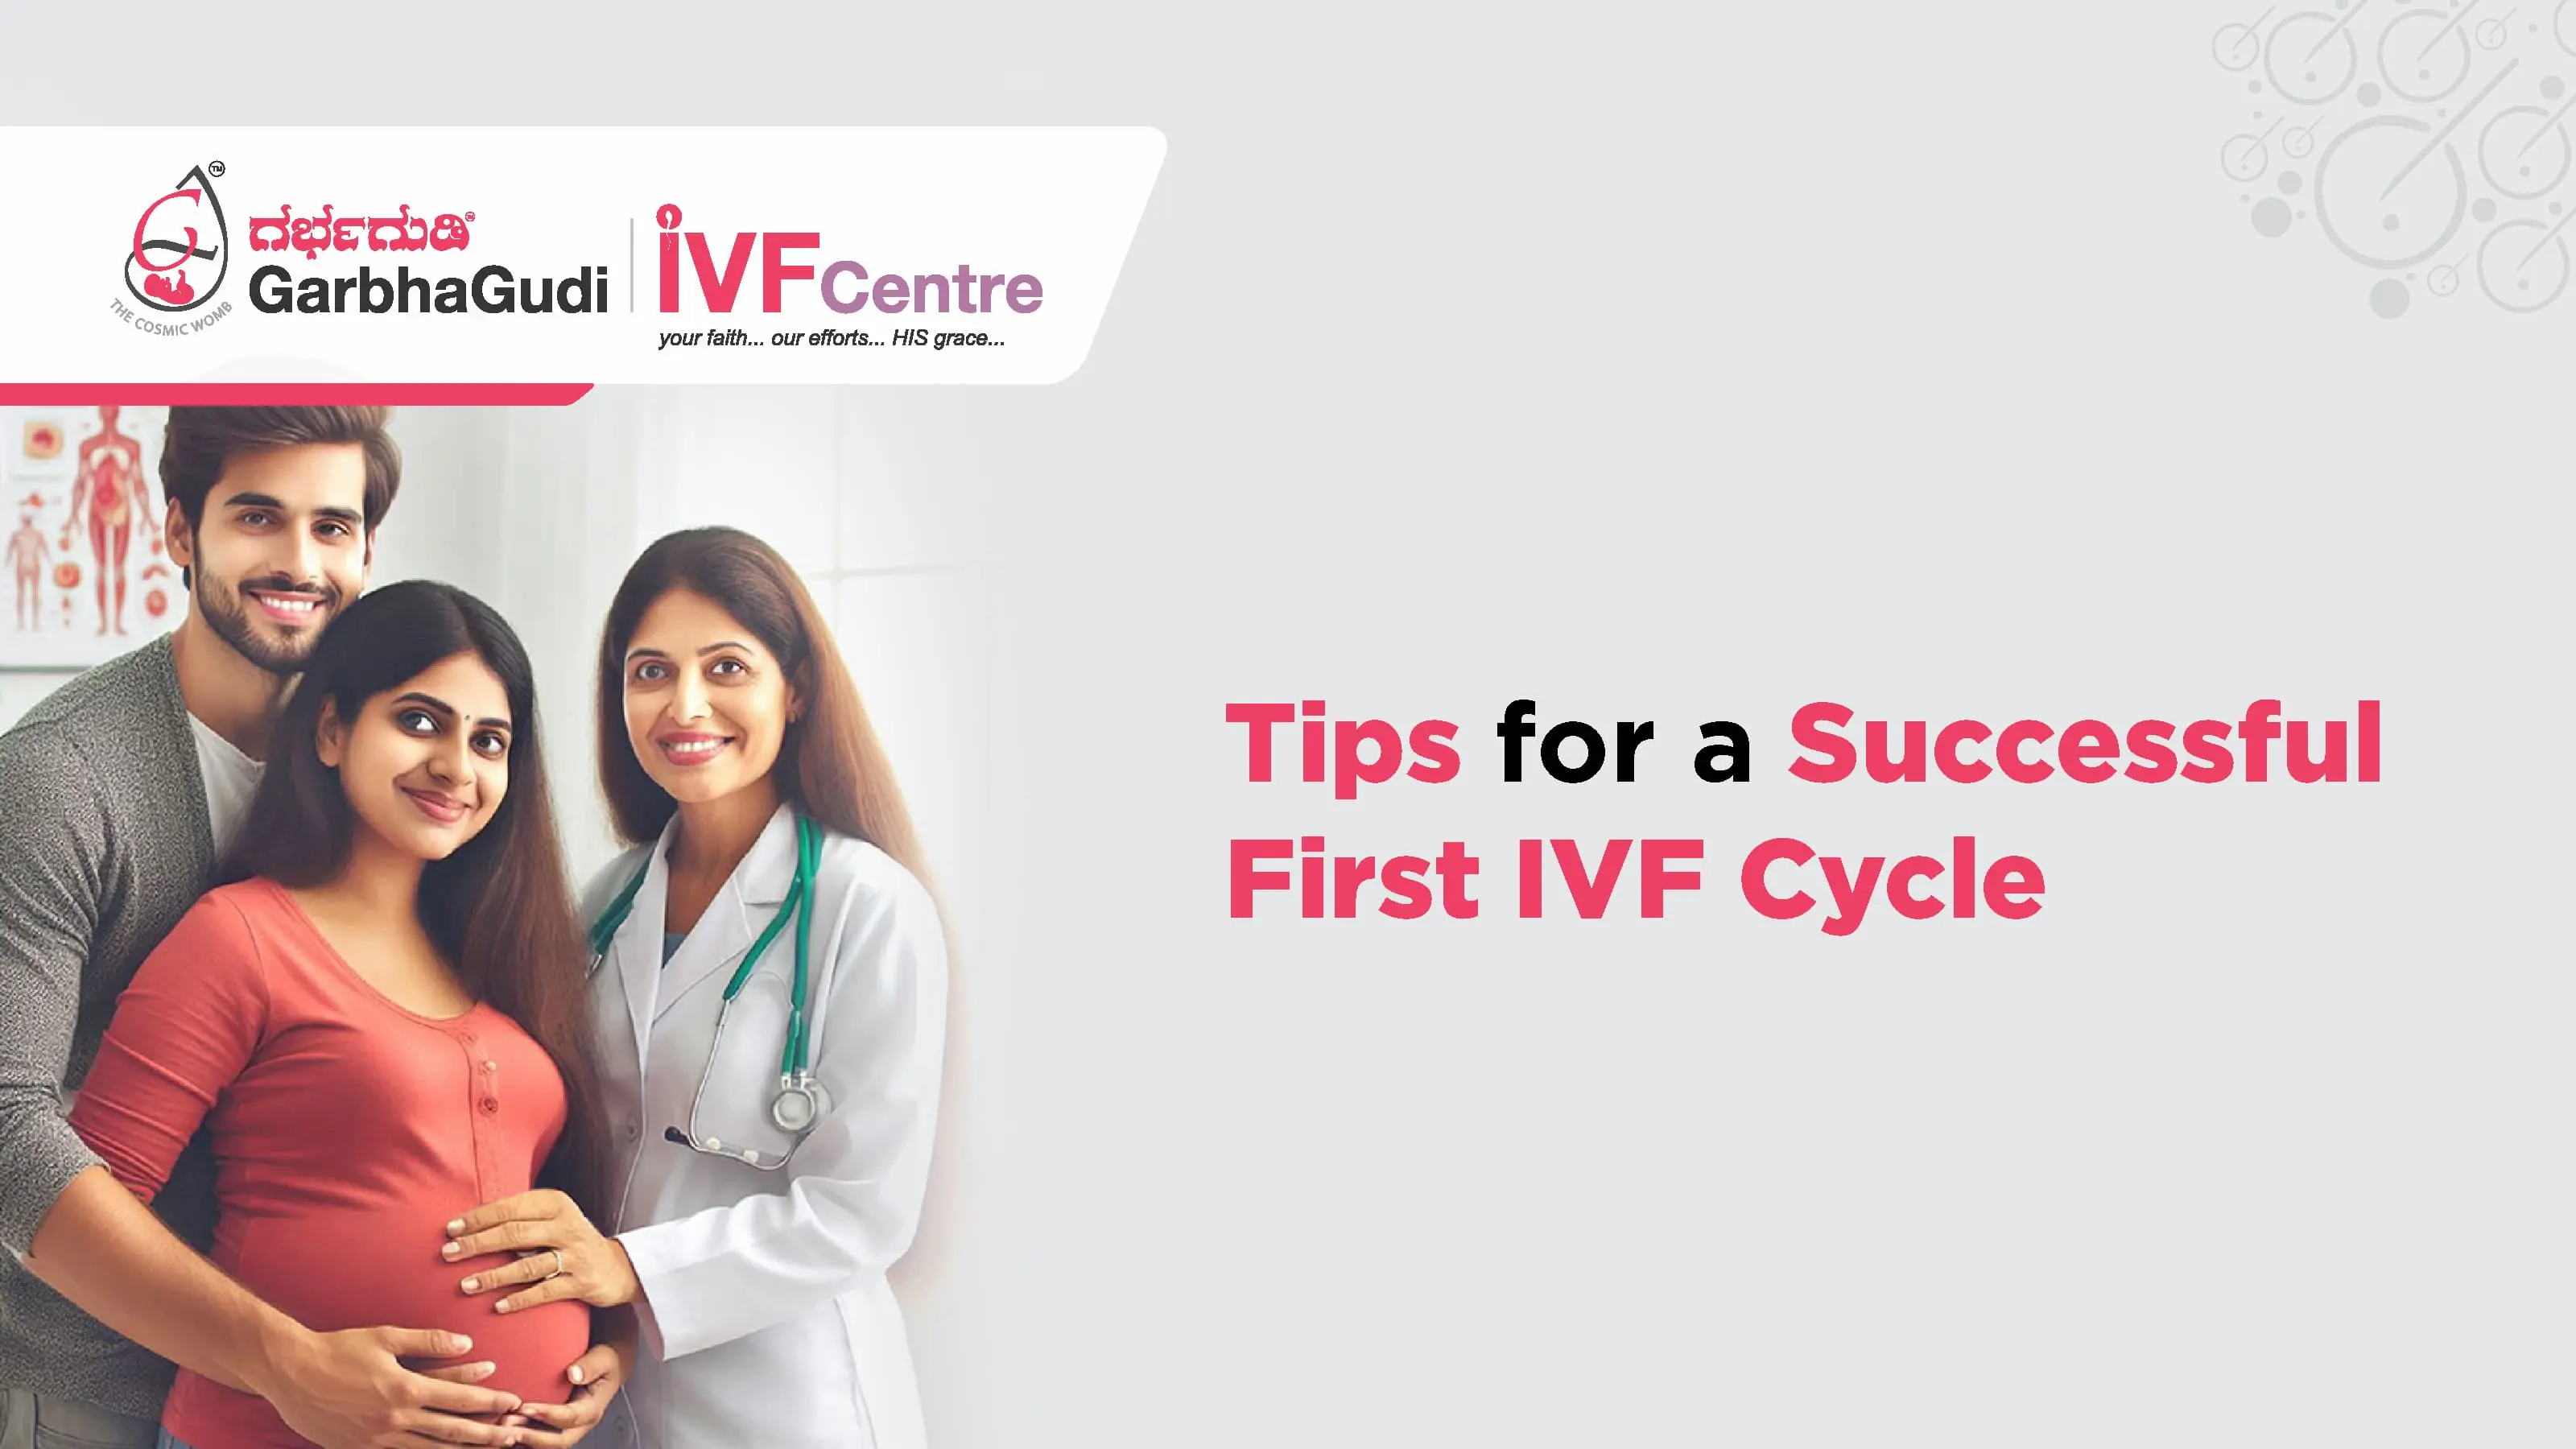 Tips for a Successful First IVF Cycle